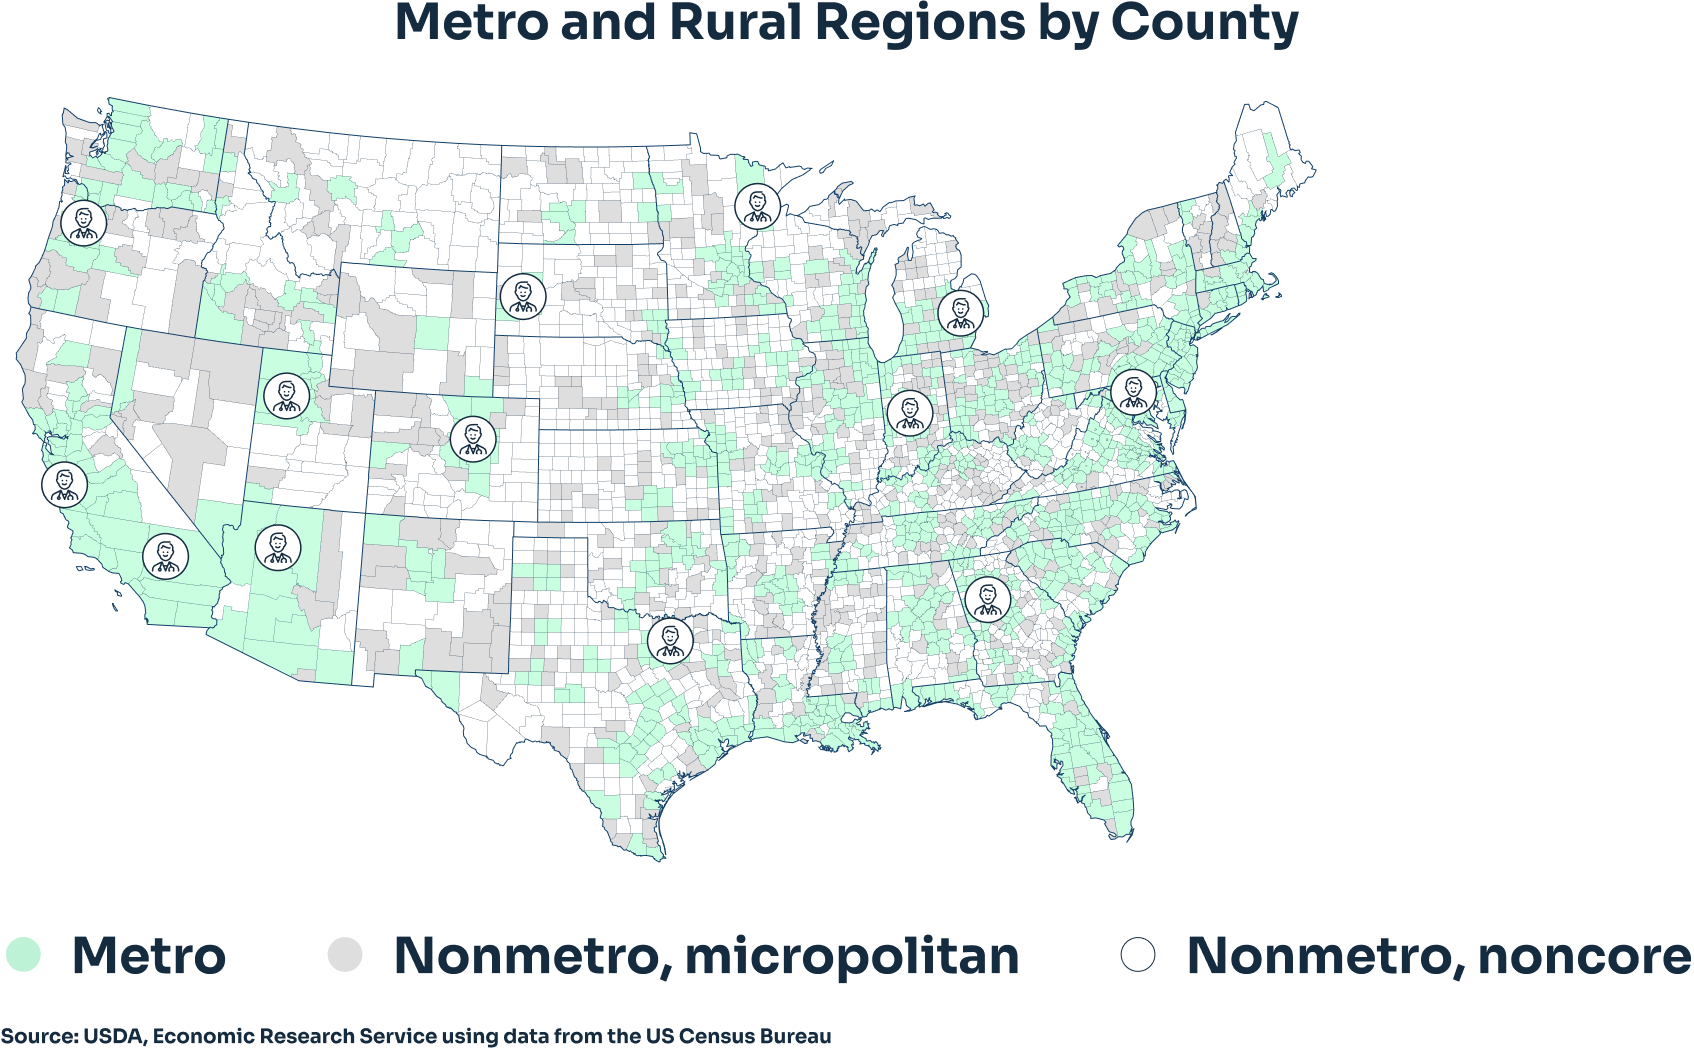 Metro and Rural Regions by County